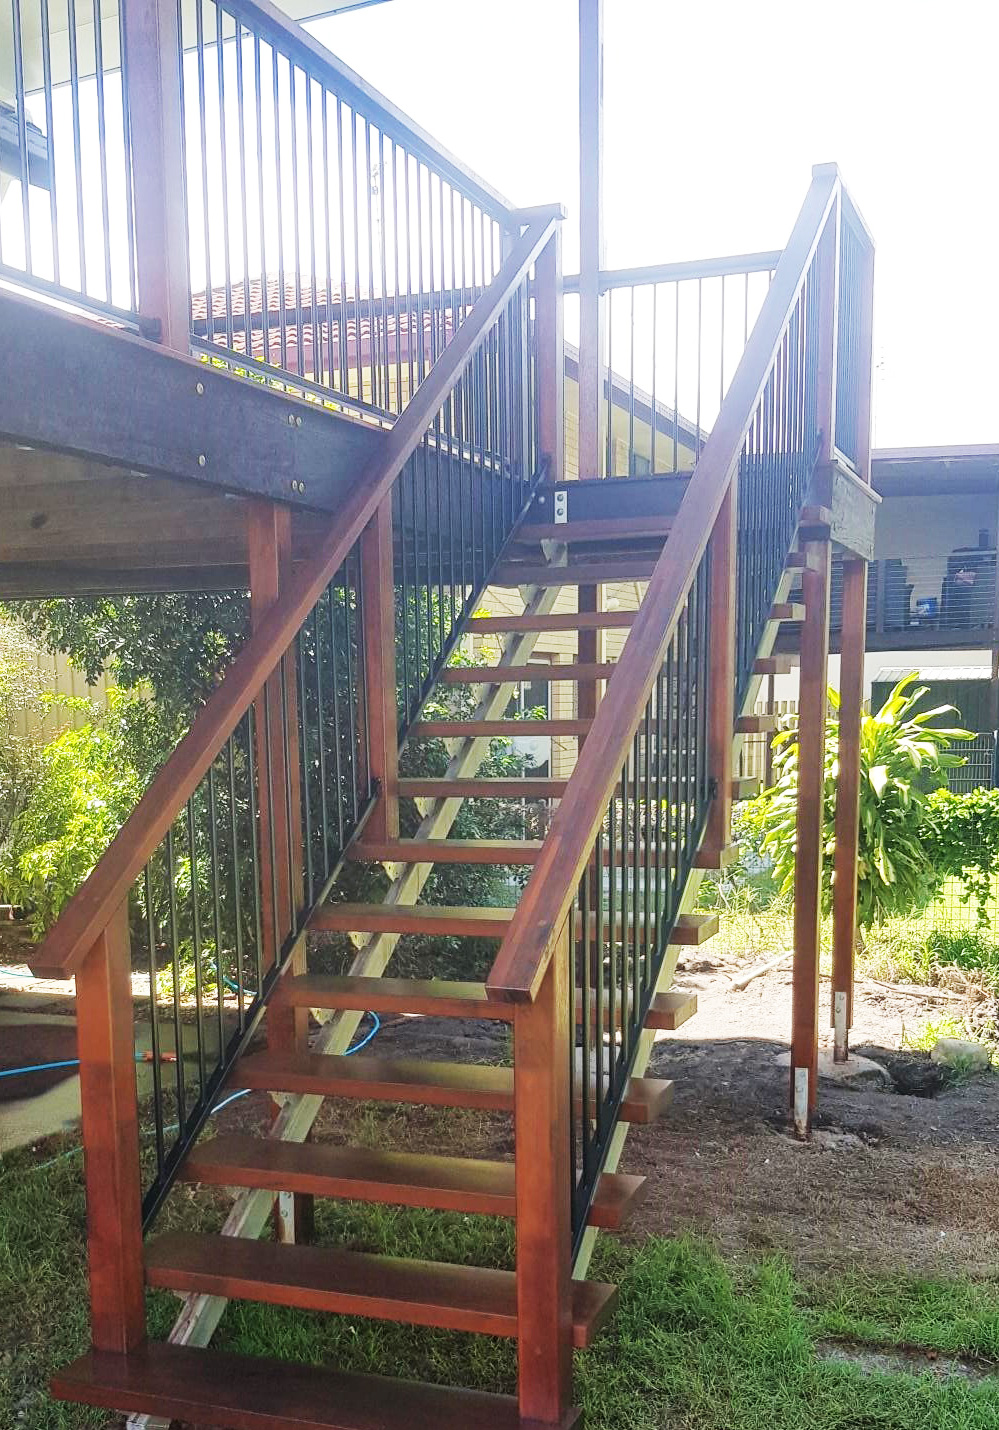 YES! We build decks on the Gold Coast (as well as Brisbane). Here is a deck we recently finished in Hollywell on the Gold Coast. Contact Premium Lifestyles today for a FREE quote on your Gold Coast Deck. #goldcoastdecks